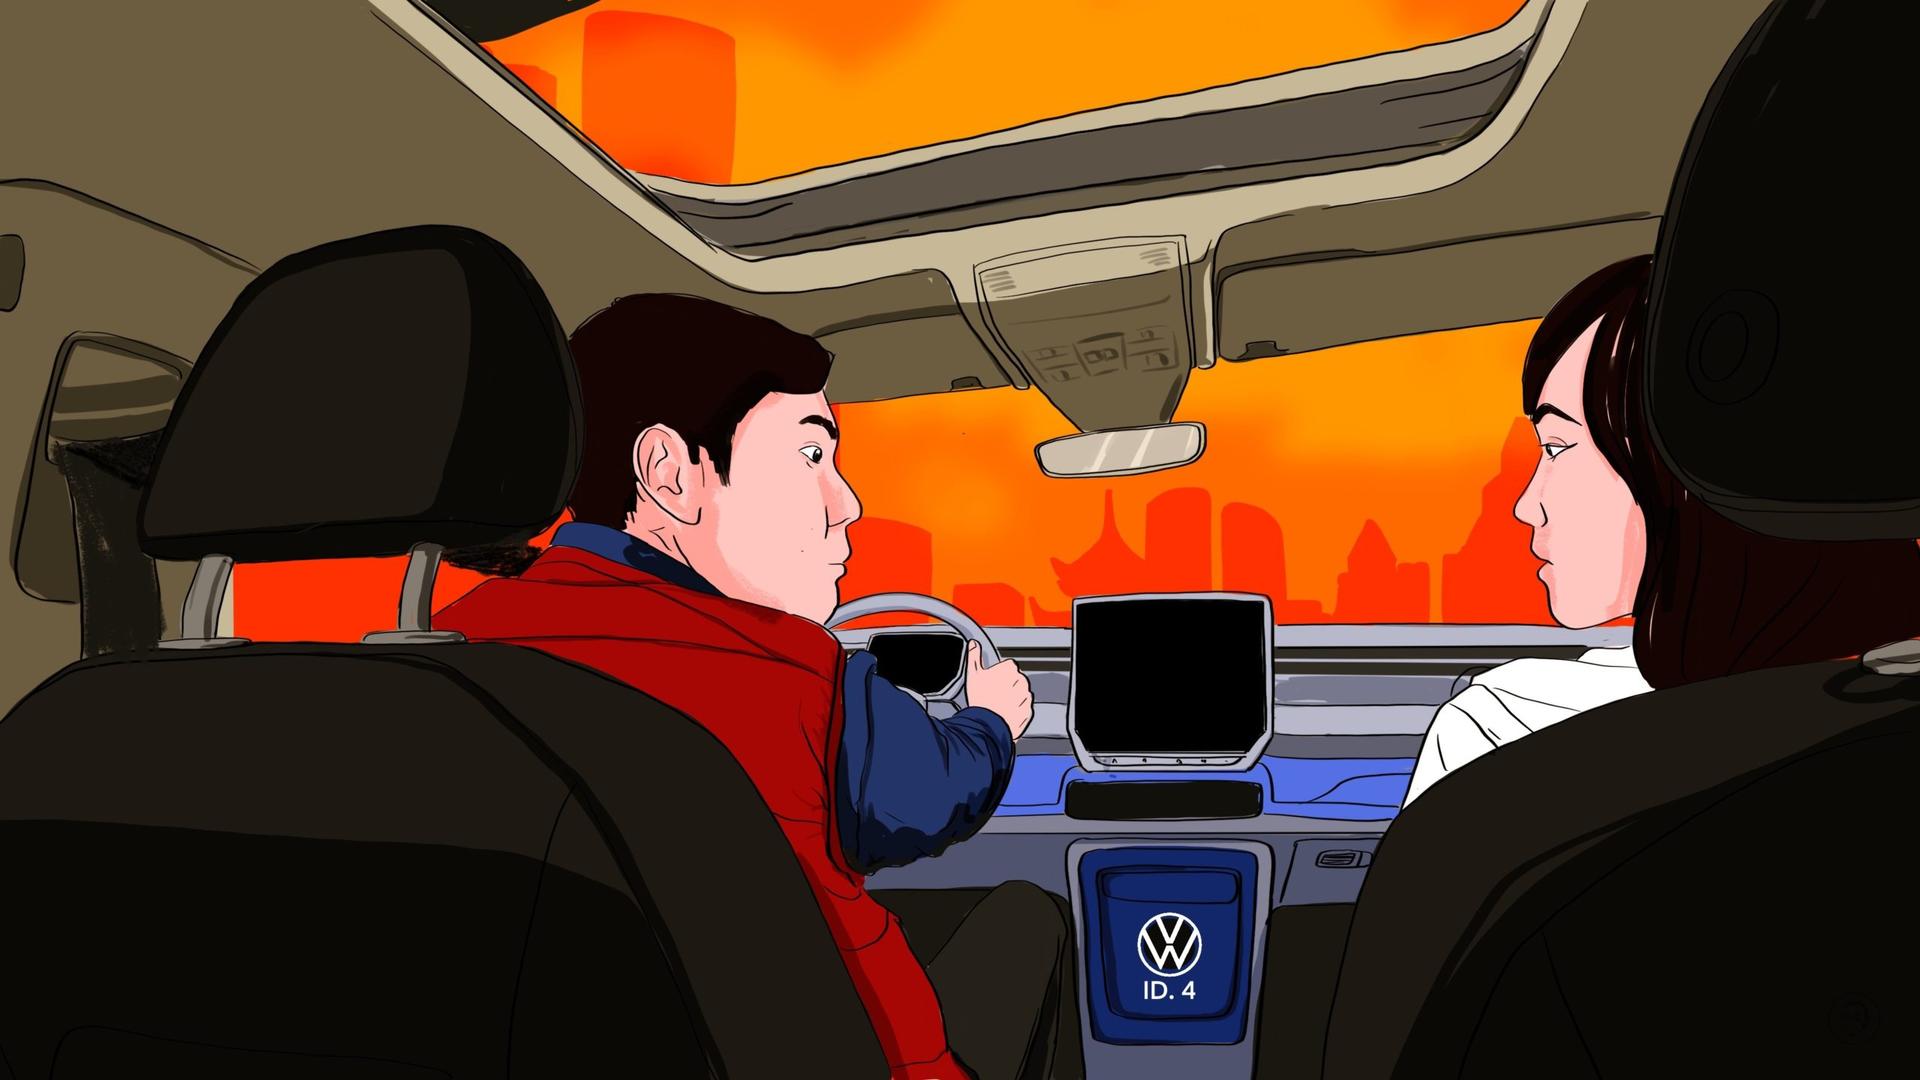 An illustration by Alex Santafe depicting a couple inside a VW car angry